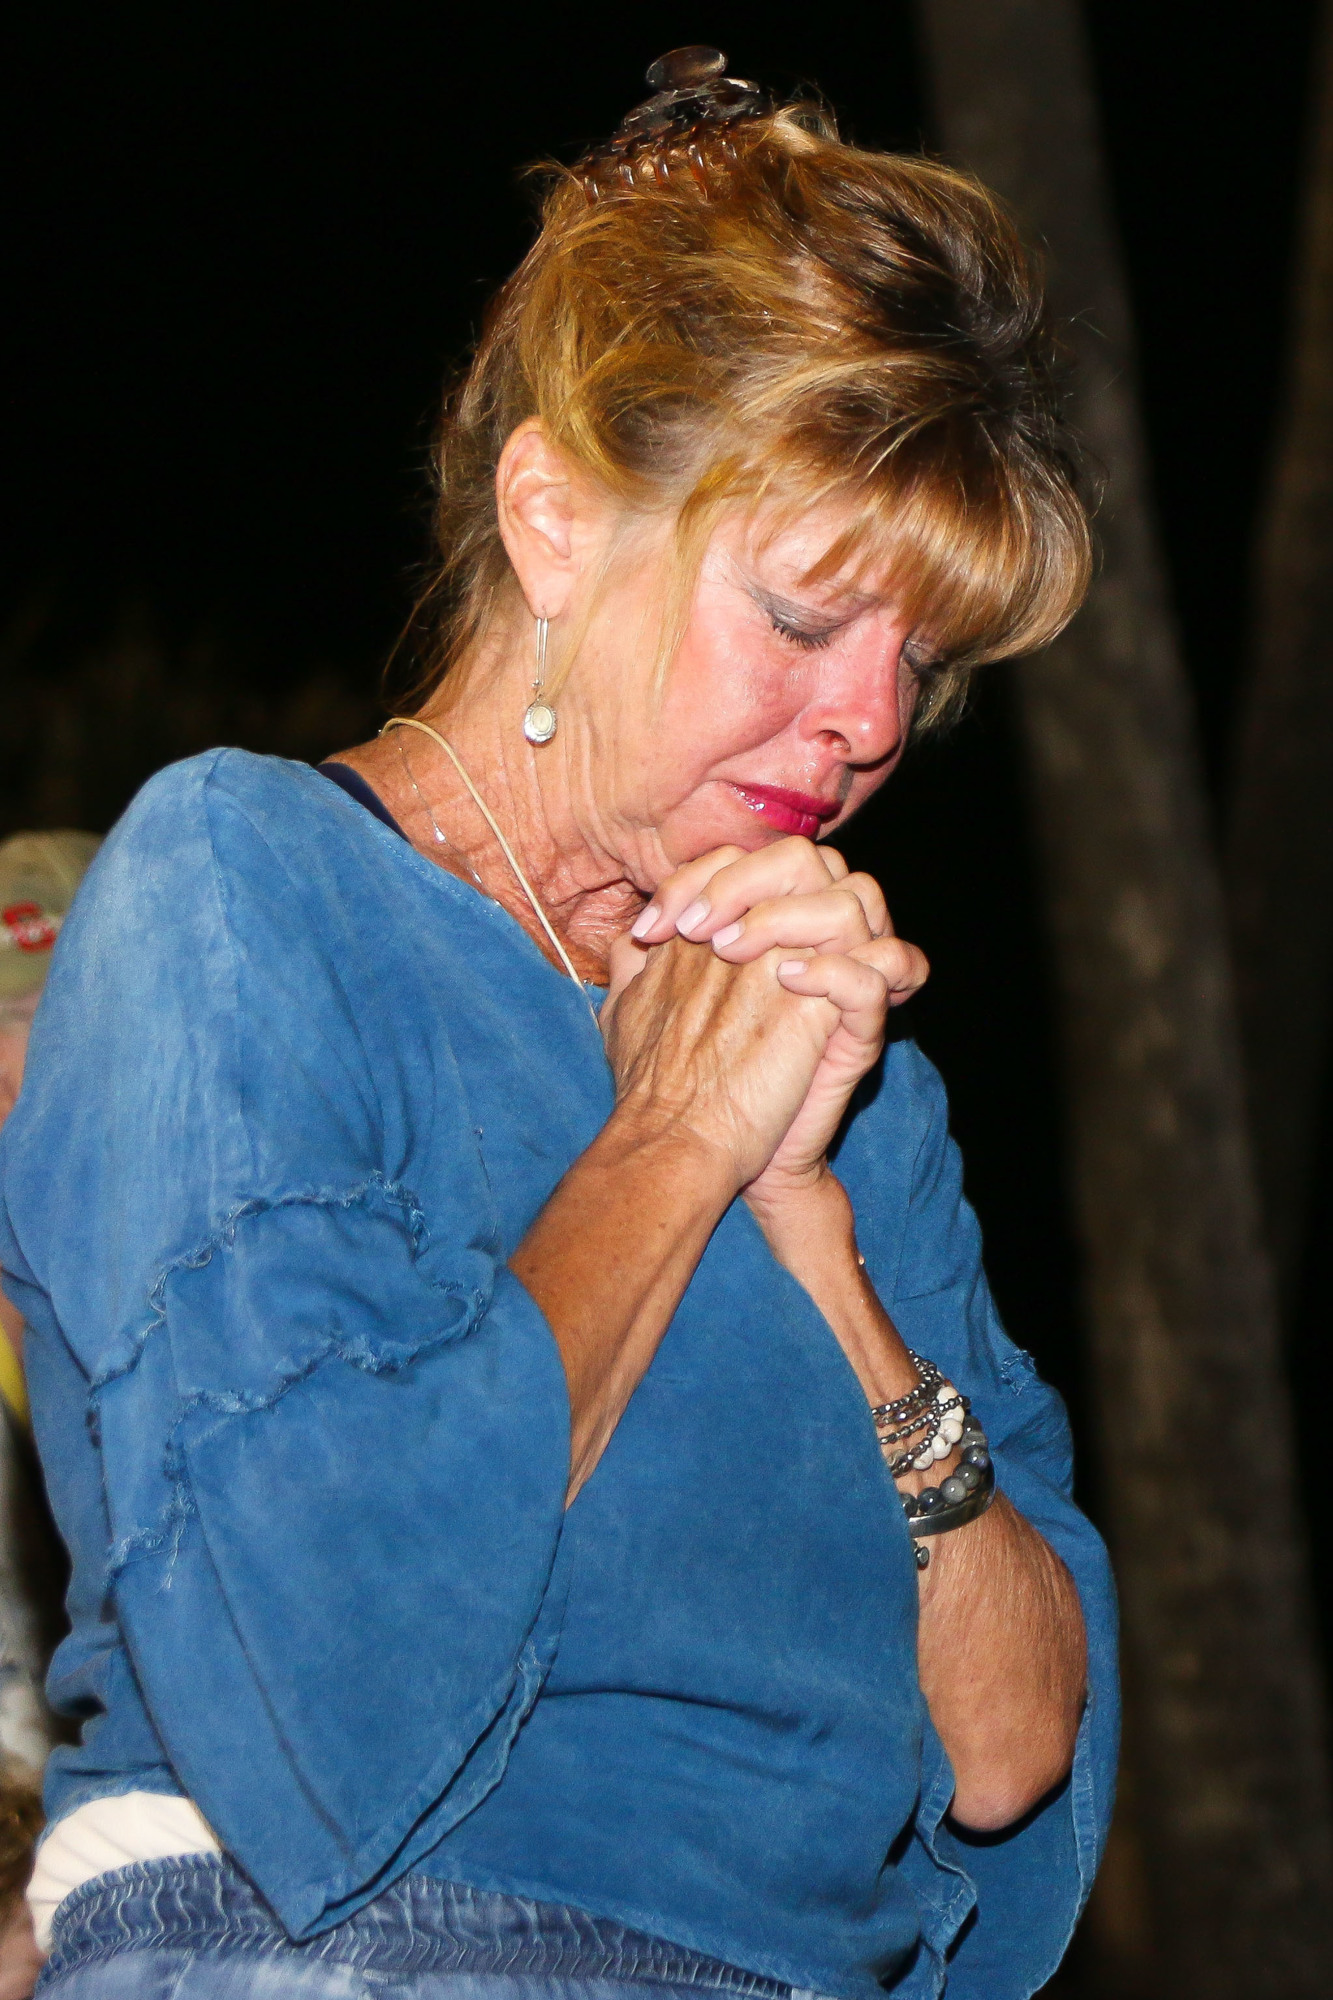 Flagler Beach resident Elizabeth Mailhoit gets emotional during the moment of silence for the 17 victims of the Parkland shooting. Photo by Paige Wilson